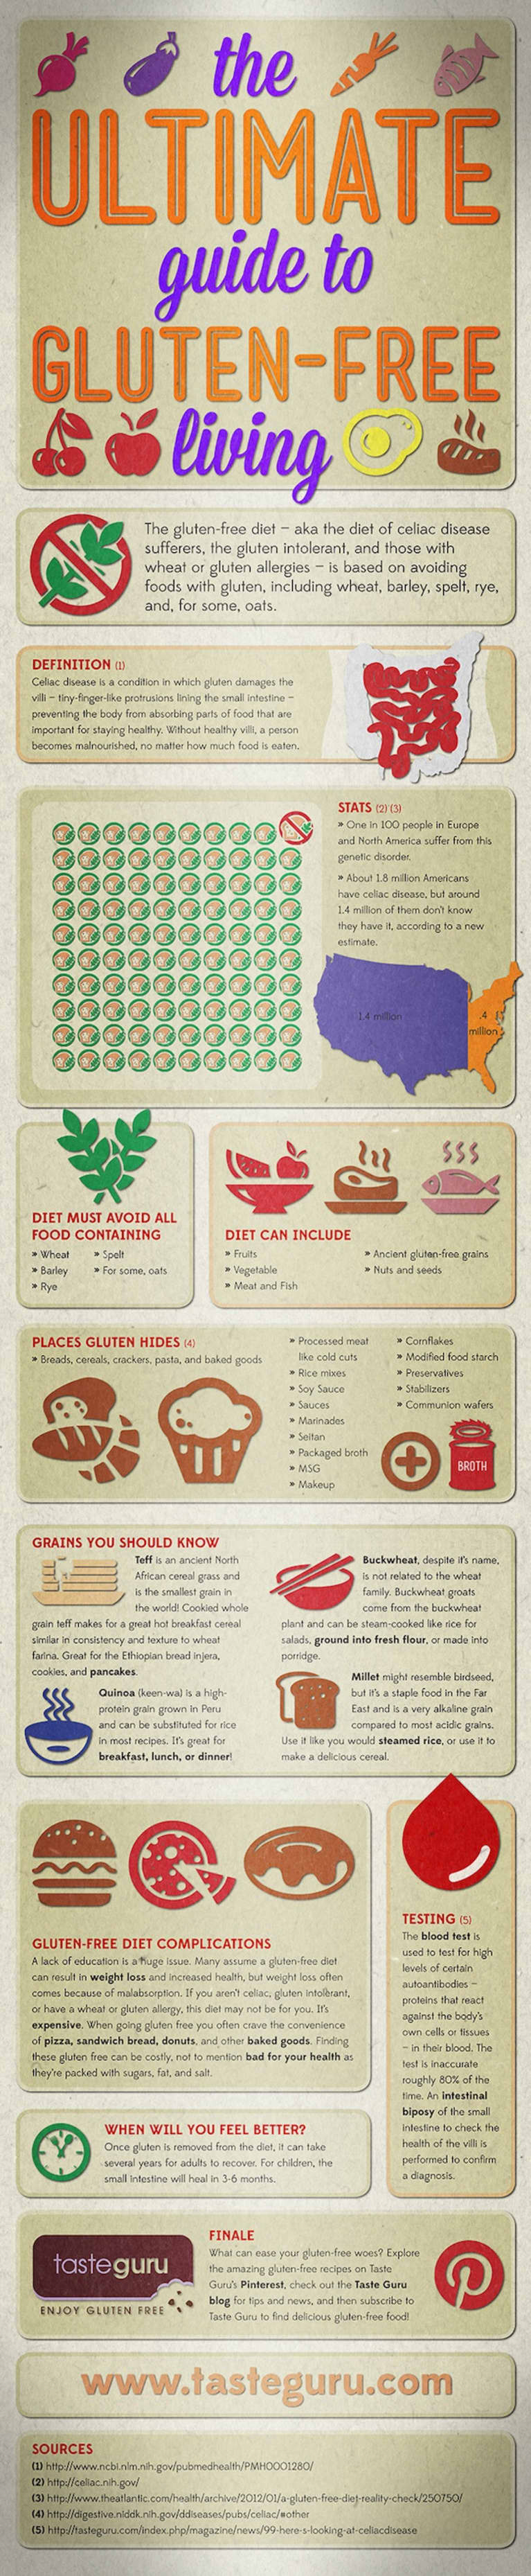 Ultimate Guide To Gluten-Free Living (Infographic)